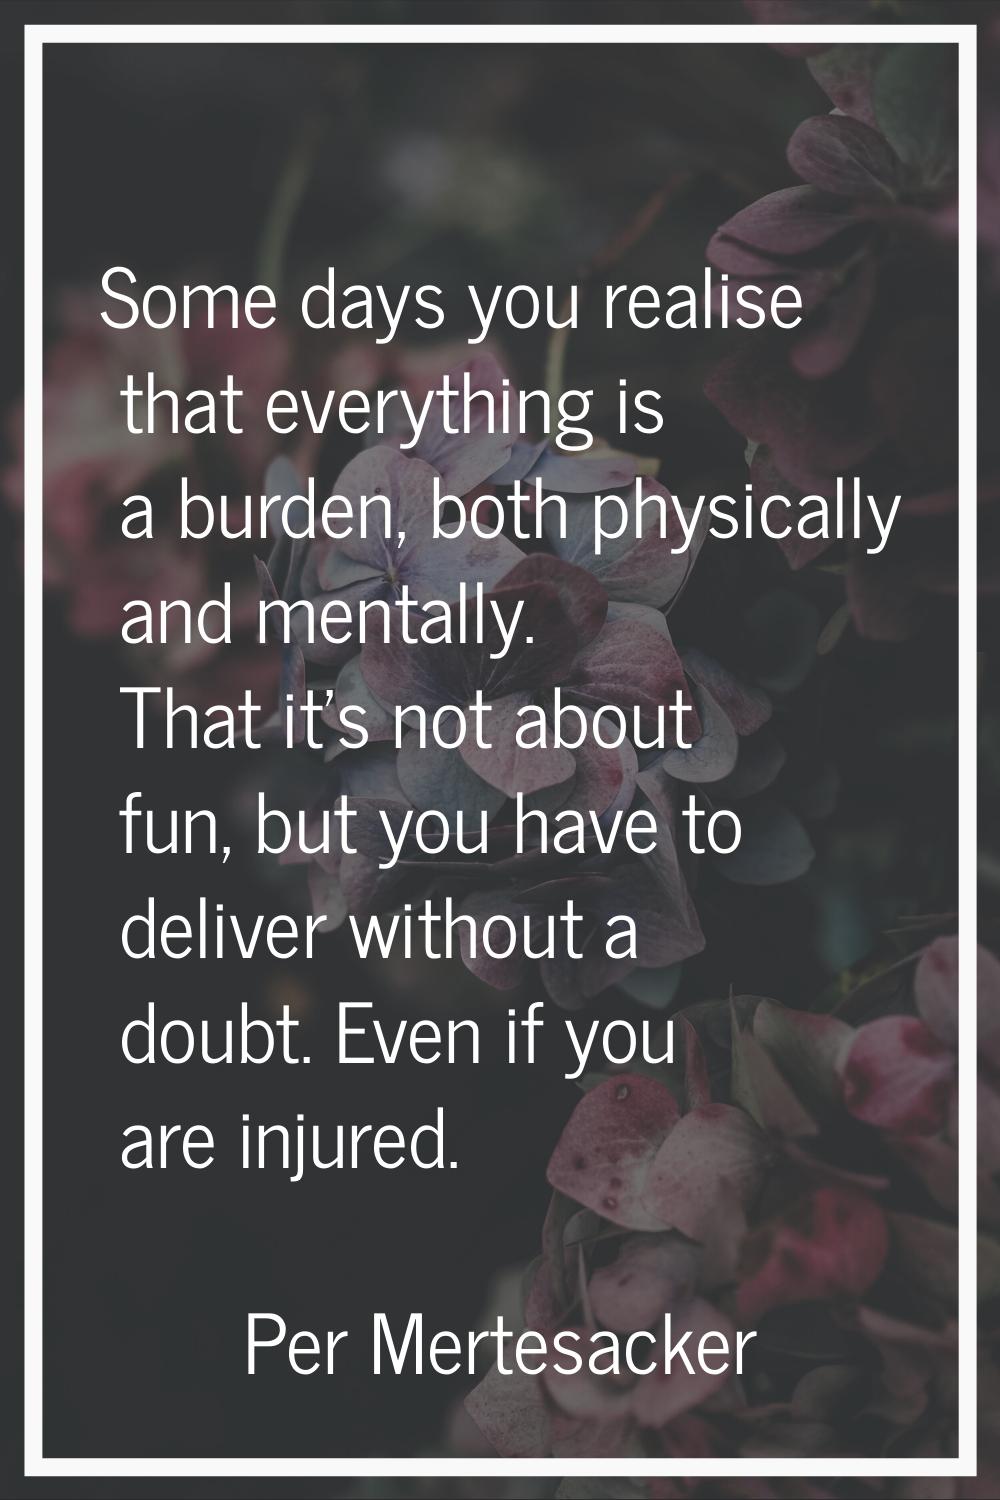 Some days you realise that everything is a burden, both physically and mentally. That it's not abou